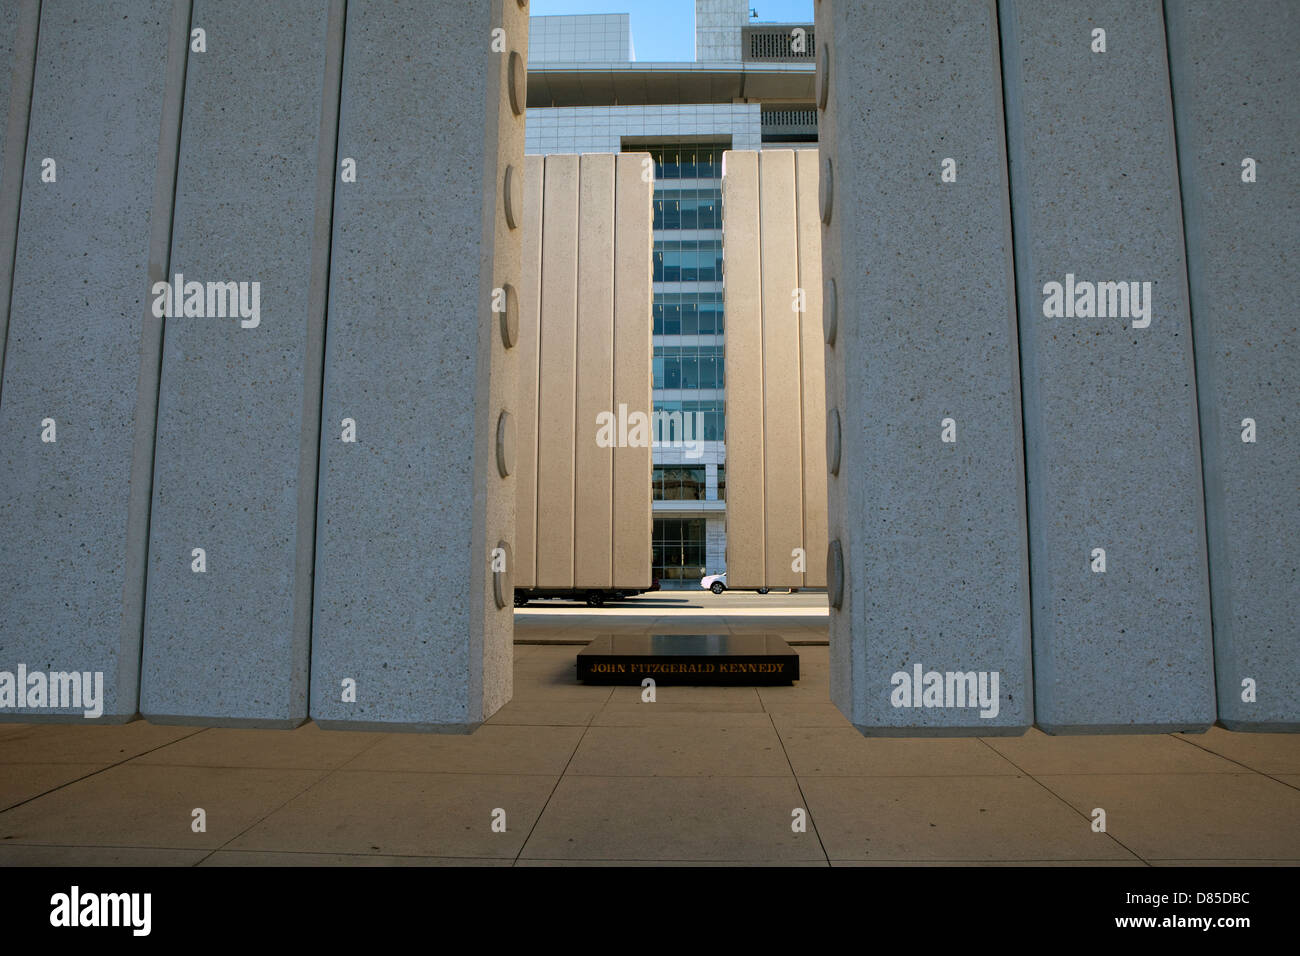 A view of the John F. Kennedy Memorial in Dallas, Texas Stock Photo